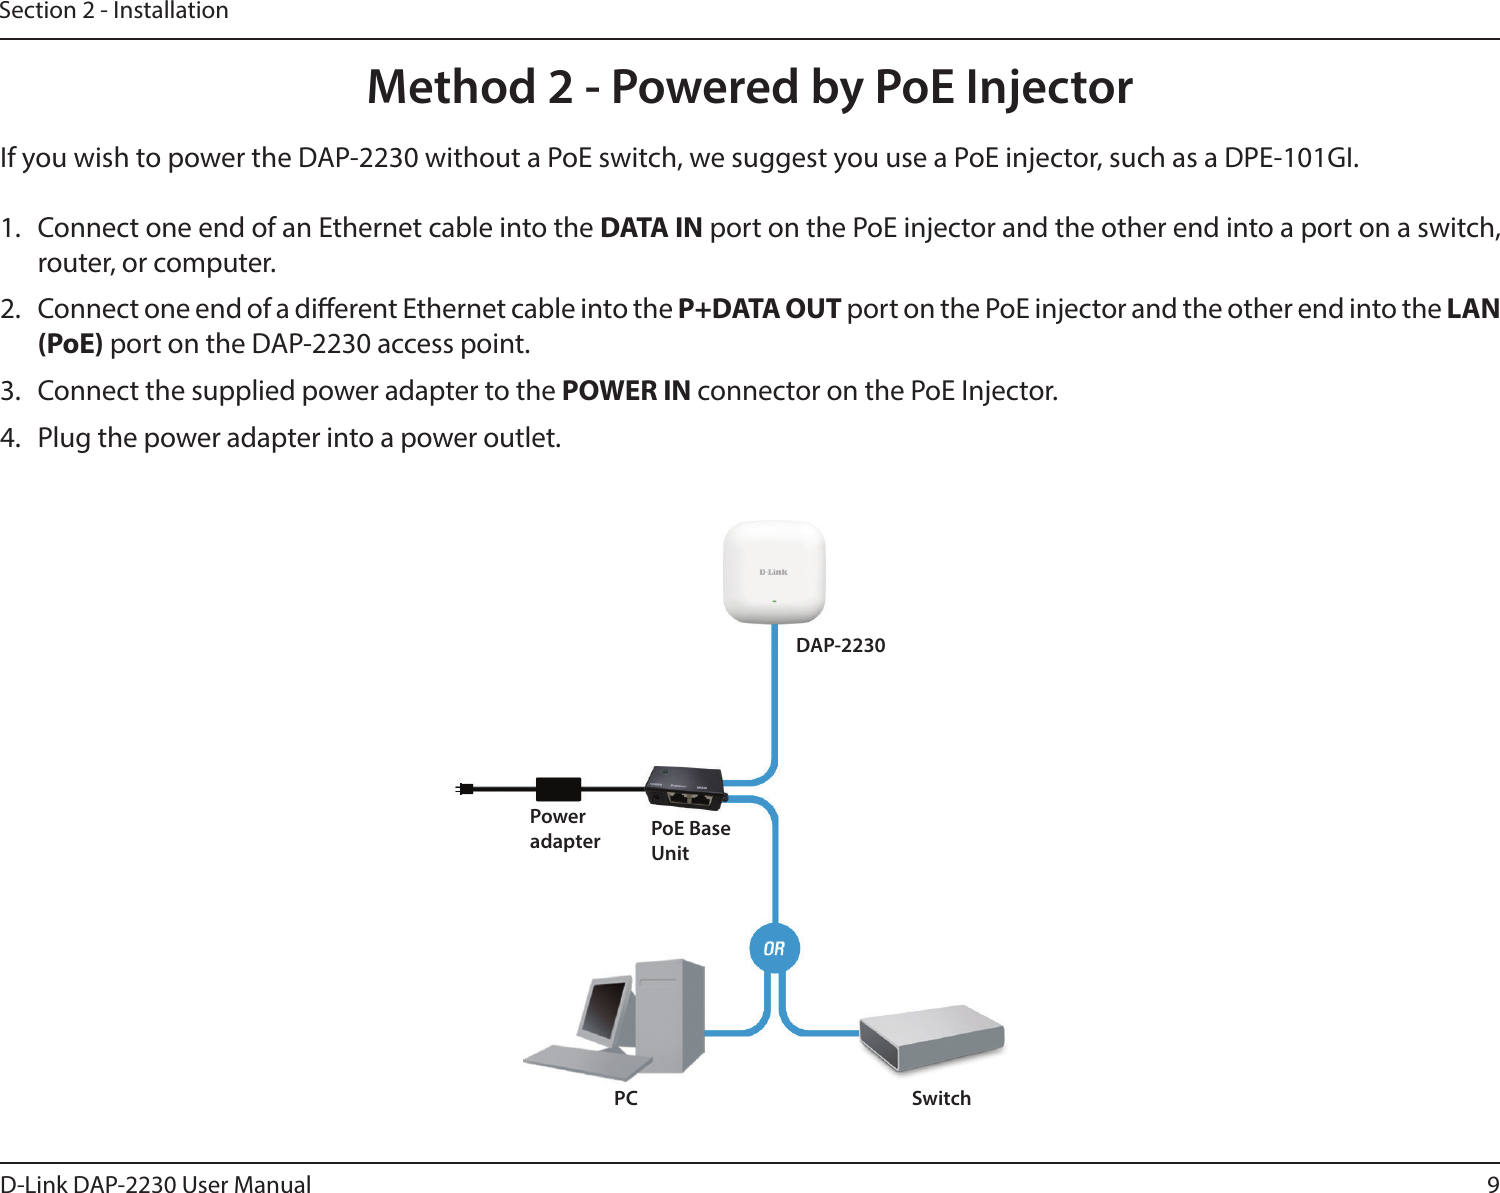 9D-Link DAP-2230 User ManualSection 2 - InstallationMethod 2 - Powered by PoE InjectorIf you wish to power the DAP-2230 without a PoE switch, we suggest you use a PoE injector, such as a DPE-101GI. 1.  Connect one end of an Ethernet cable into the DATA IN port on the PoE injector and the other end into a port on a switch, router, or computer. 2.  Connect one end of a dierent Ethernet cable into the P+DATA OUT port on the PoE injector and the other end into the LAN (PoE) port on the DAP-2230 access point. 3.  Connect the supplied power adapter to the POWER IN connector on the PoE Injector.4.  Plug the power adapter into a power outlet.DAP-2230PC SwitchPower adapter PoE BaseUnit